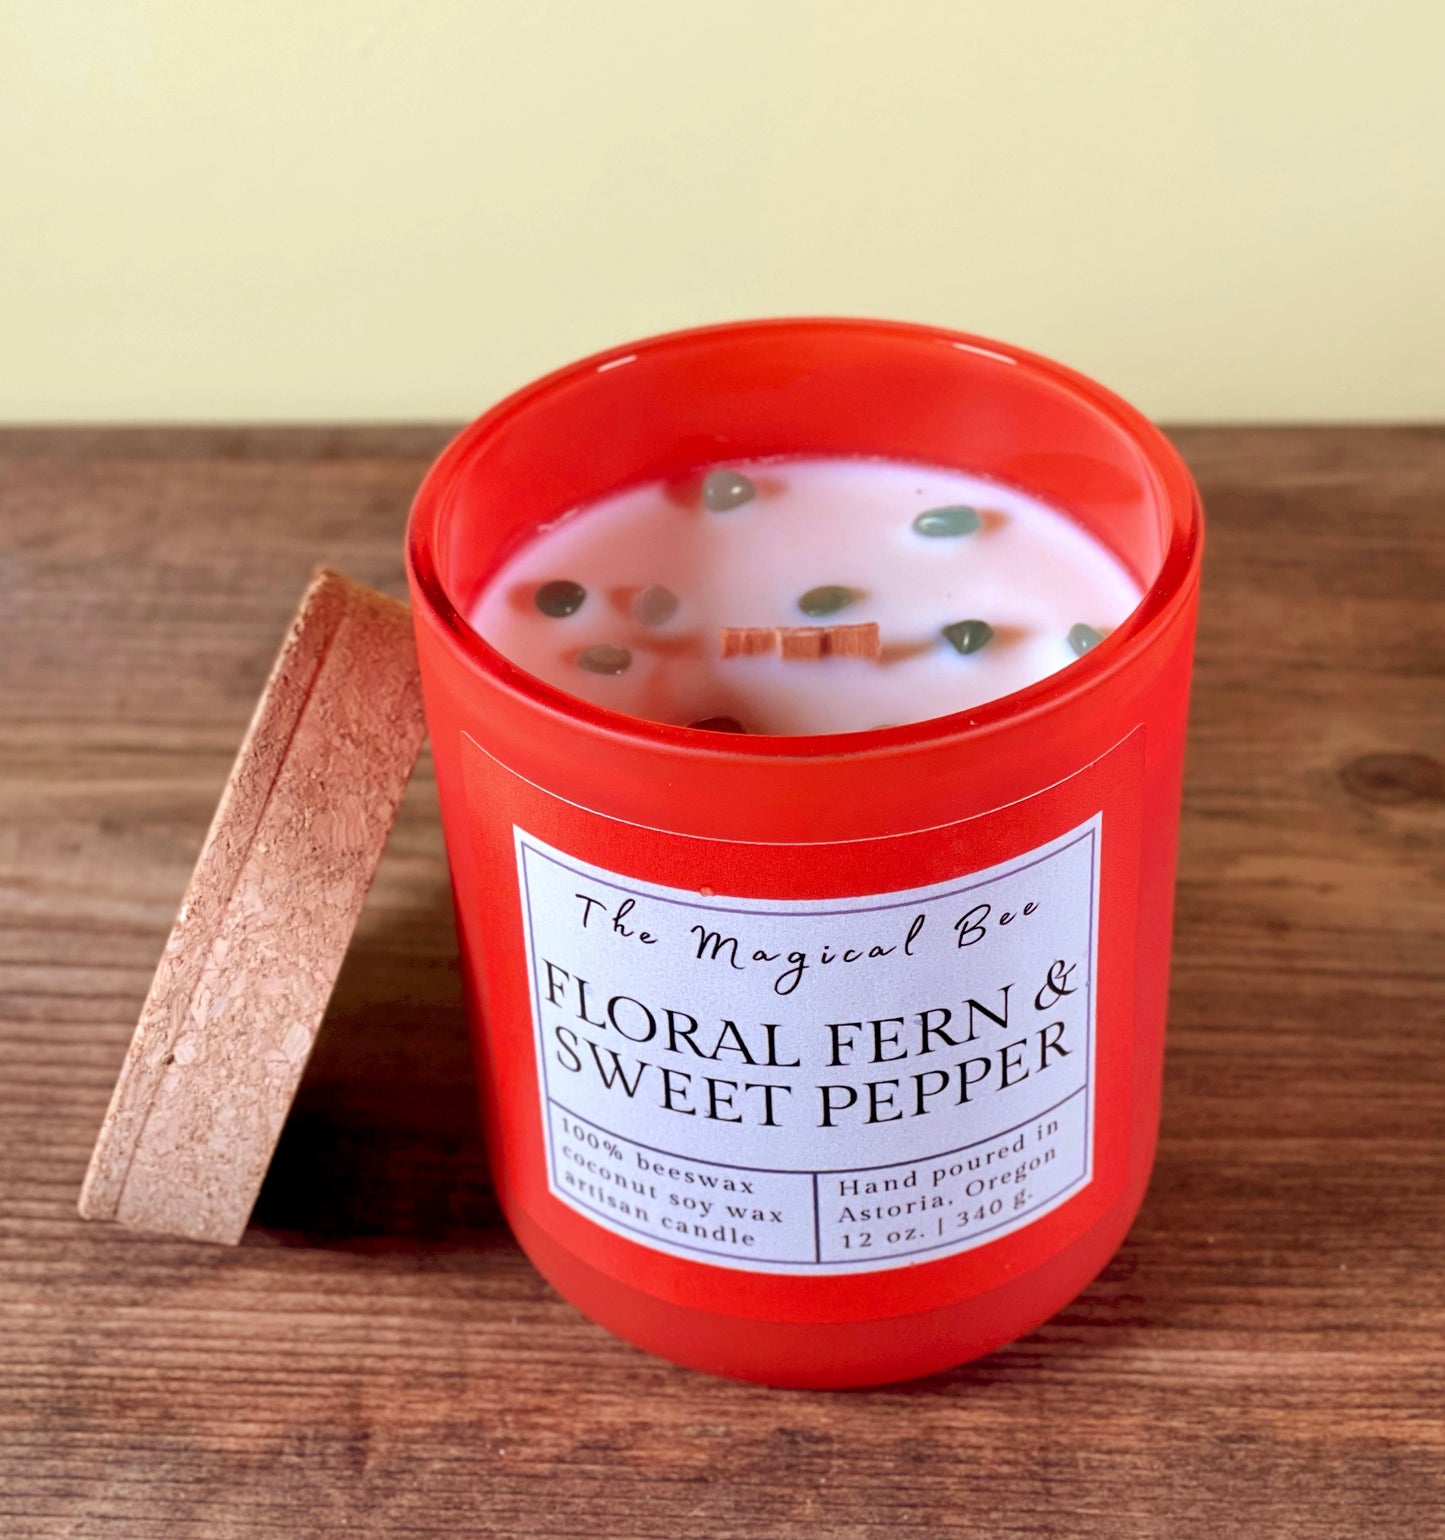 Floral Fern & Sweet Pepper Candle